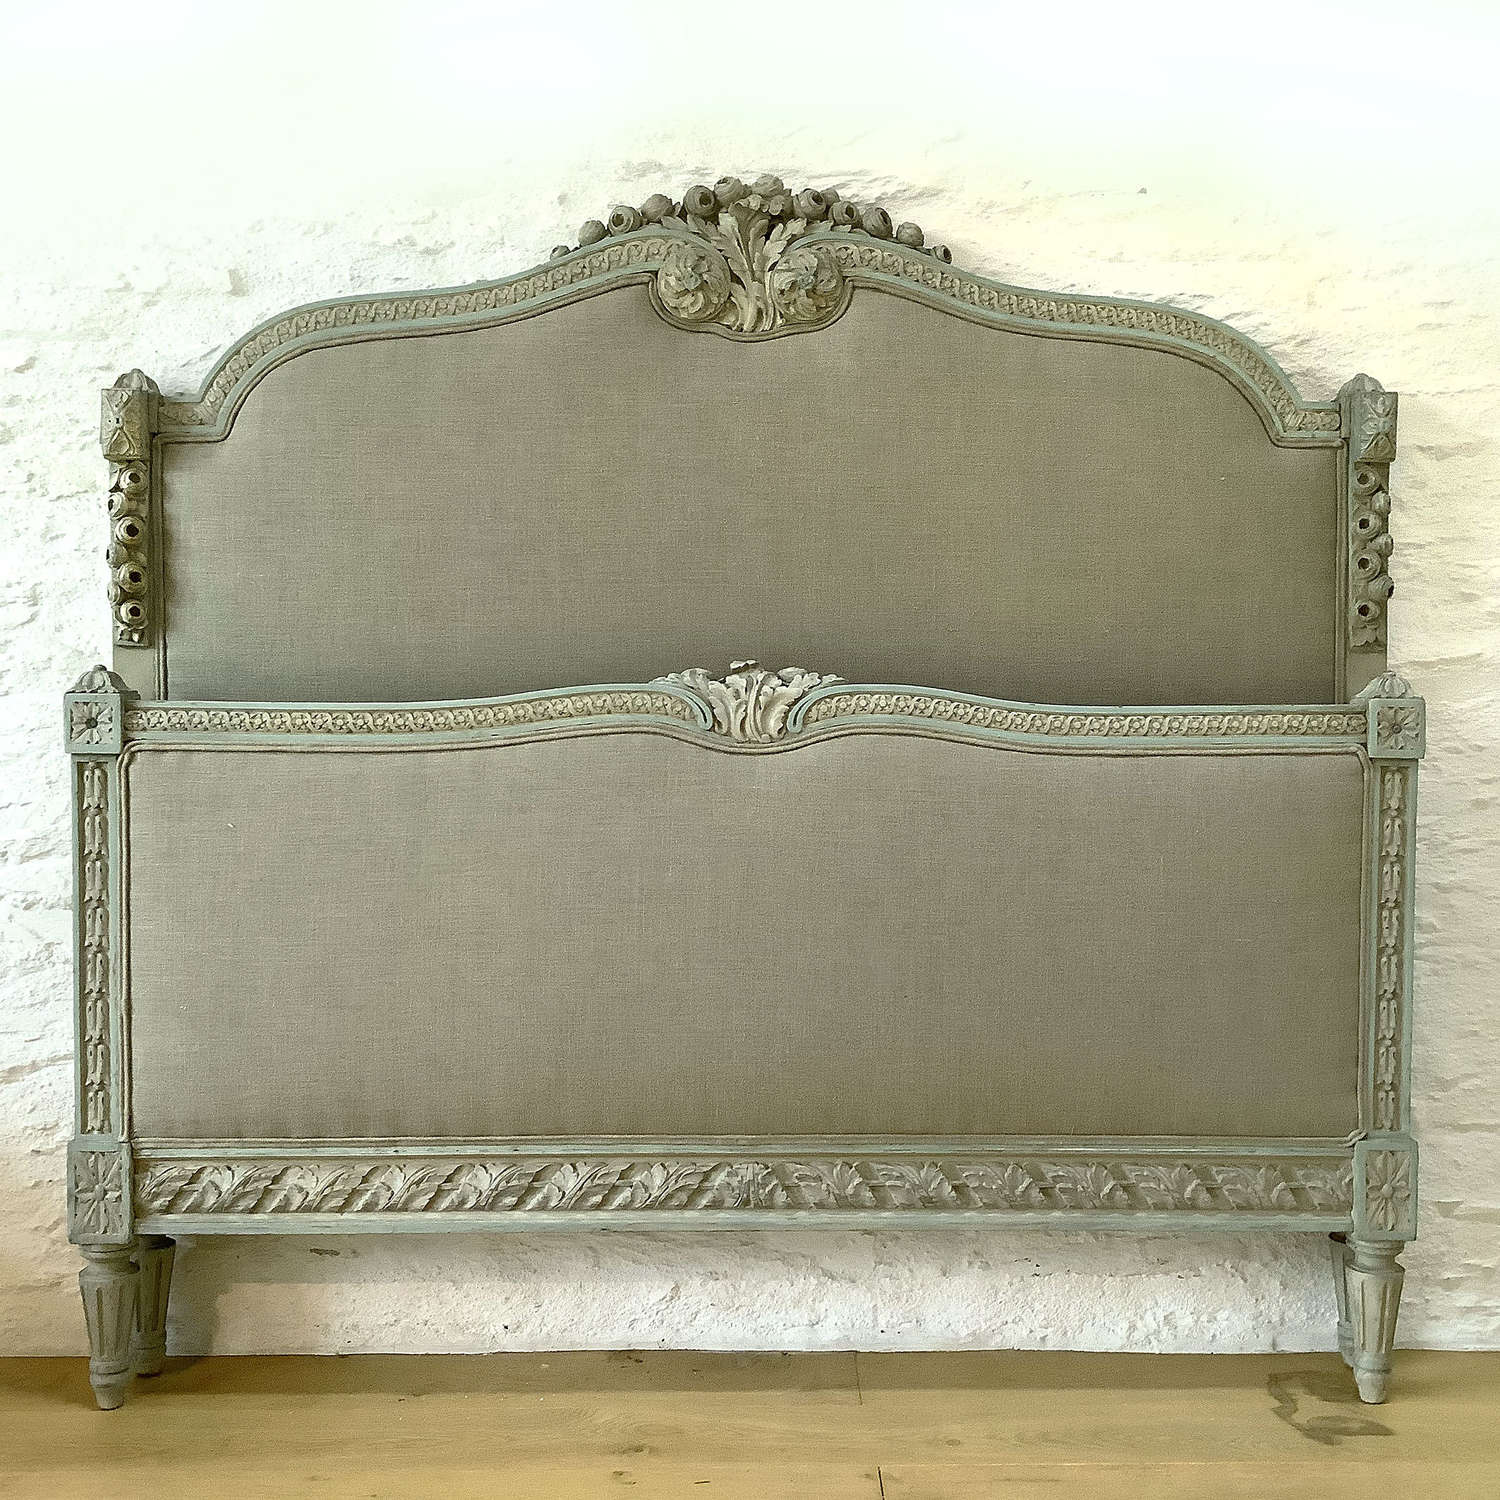 King size Louis XVI style Upholstered Bedstead